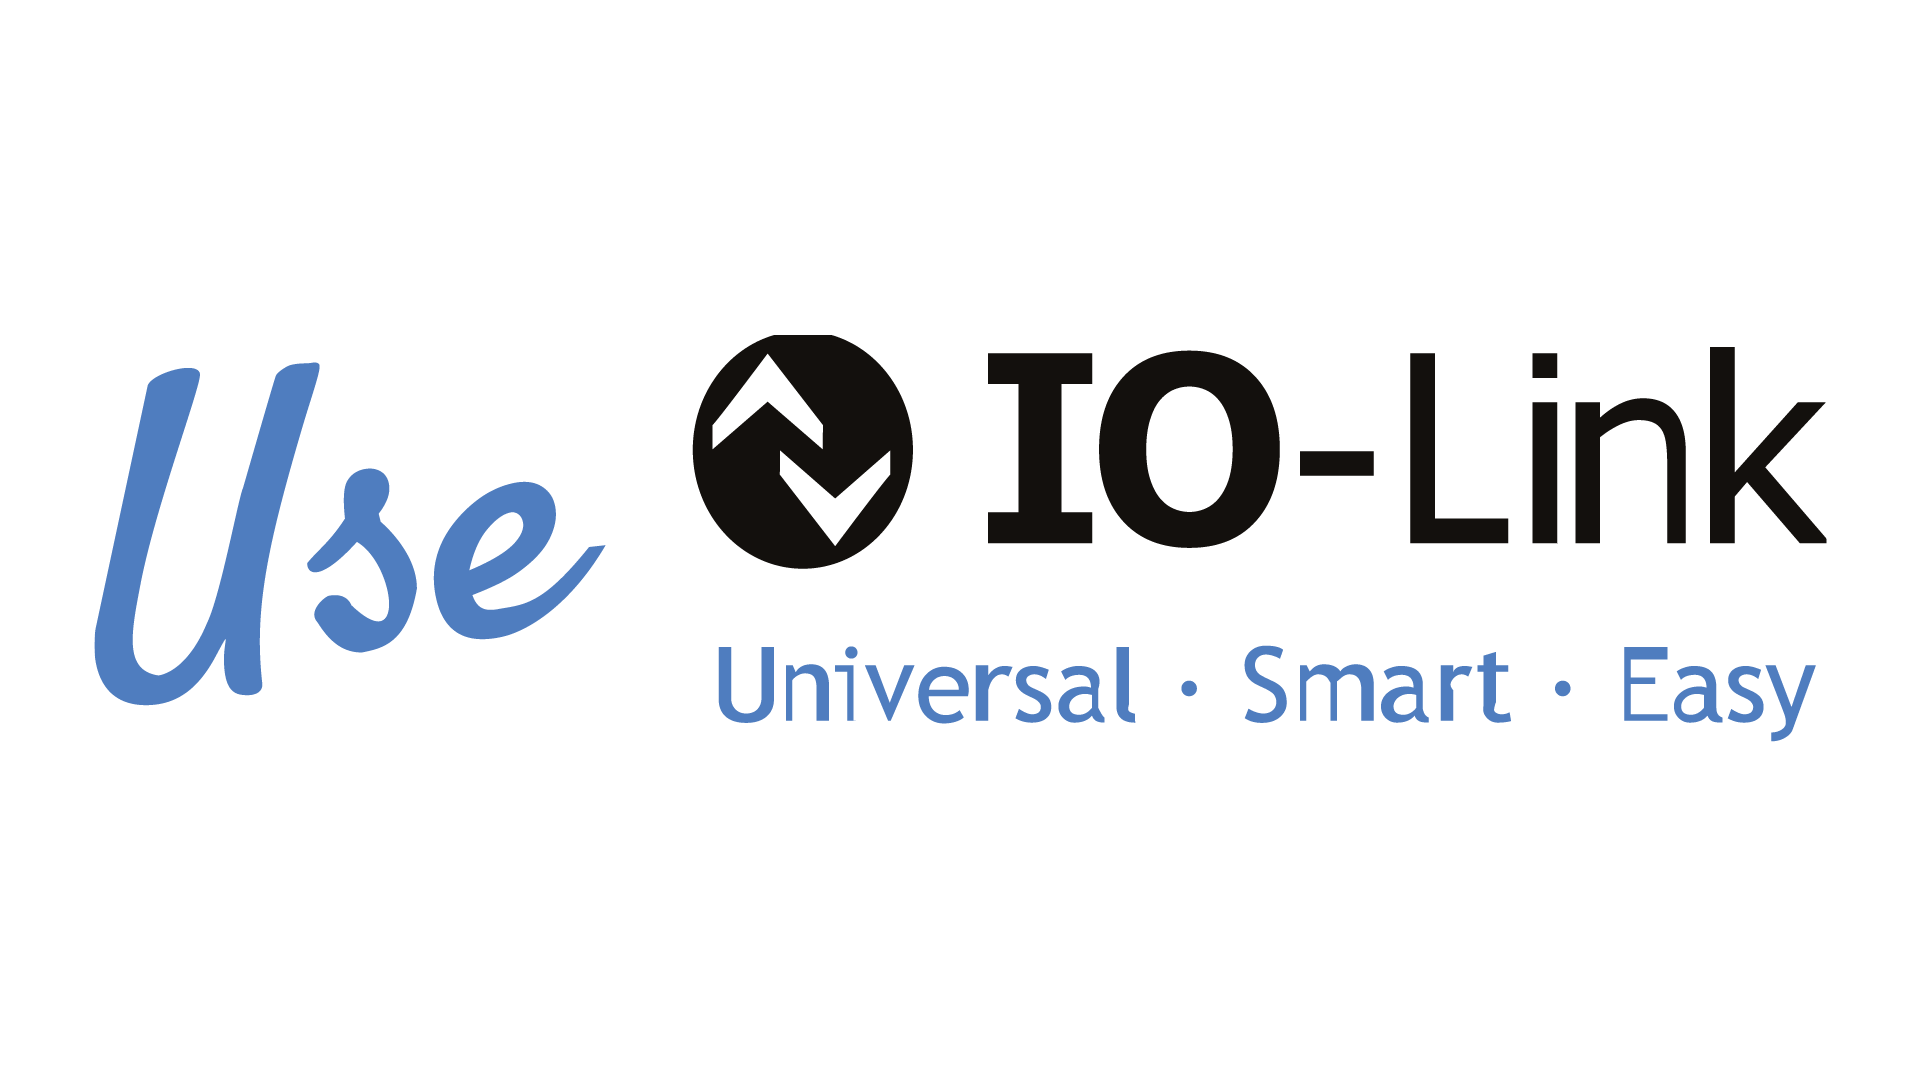 Use is hadnwritten in blue with the IO-Link logo right beside it. Under the IO-Link logo is written: "Universal. Smart, Easy".